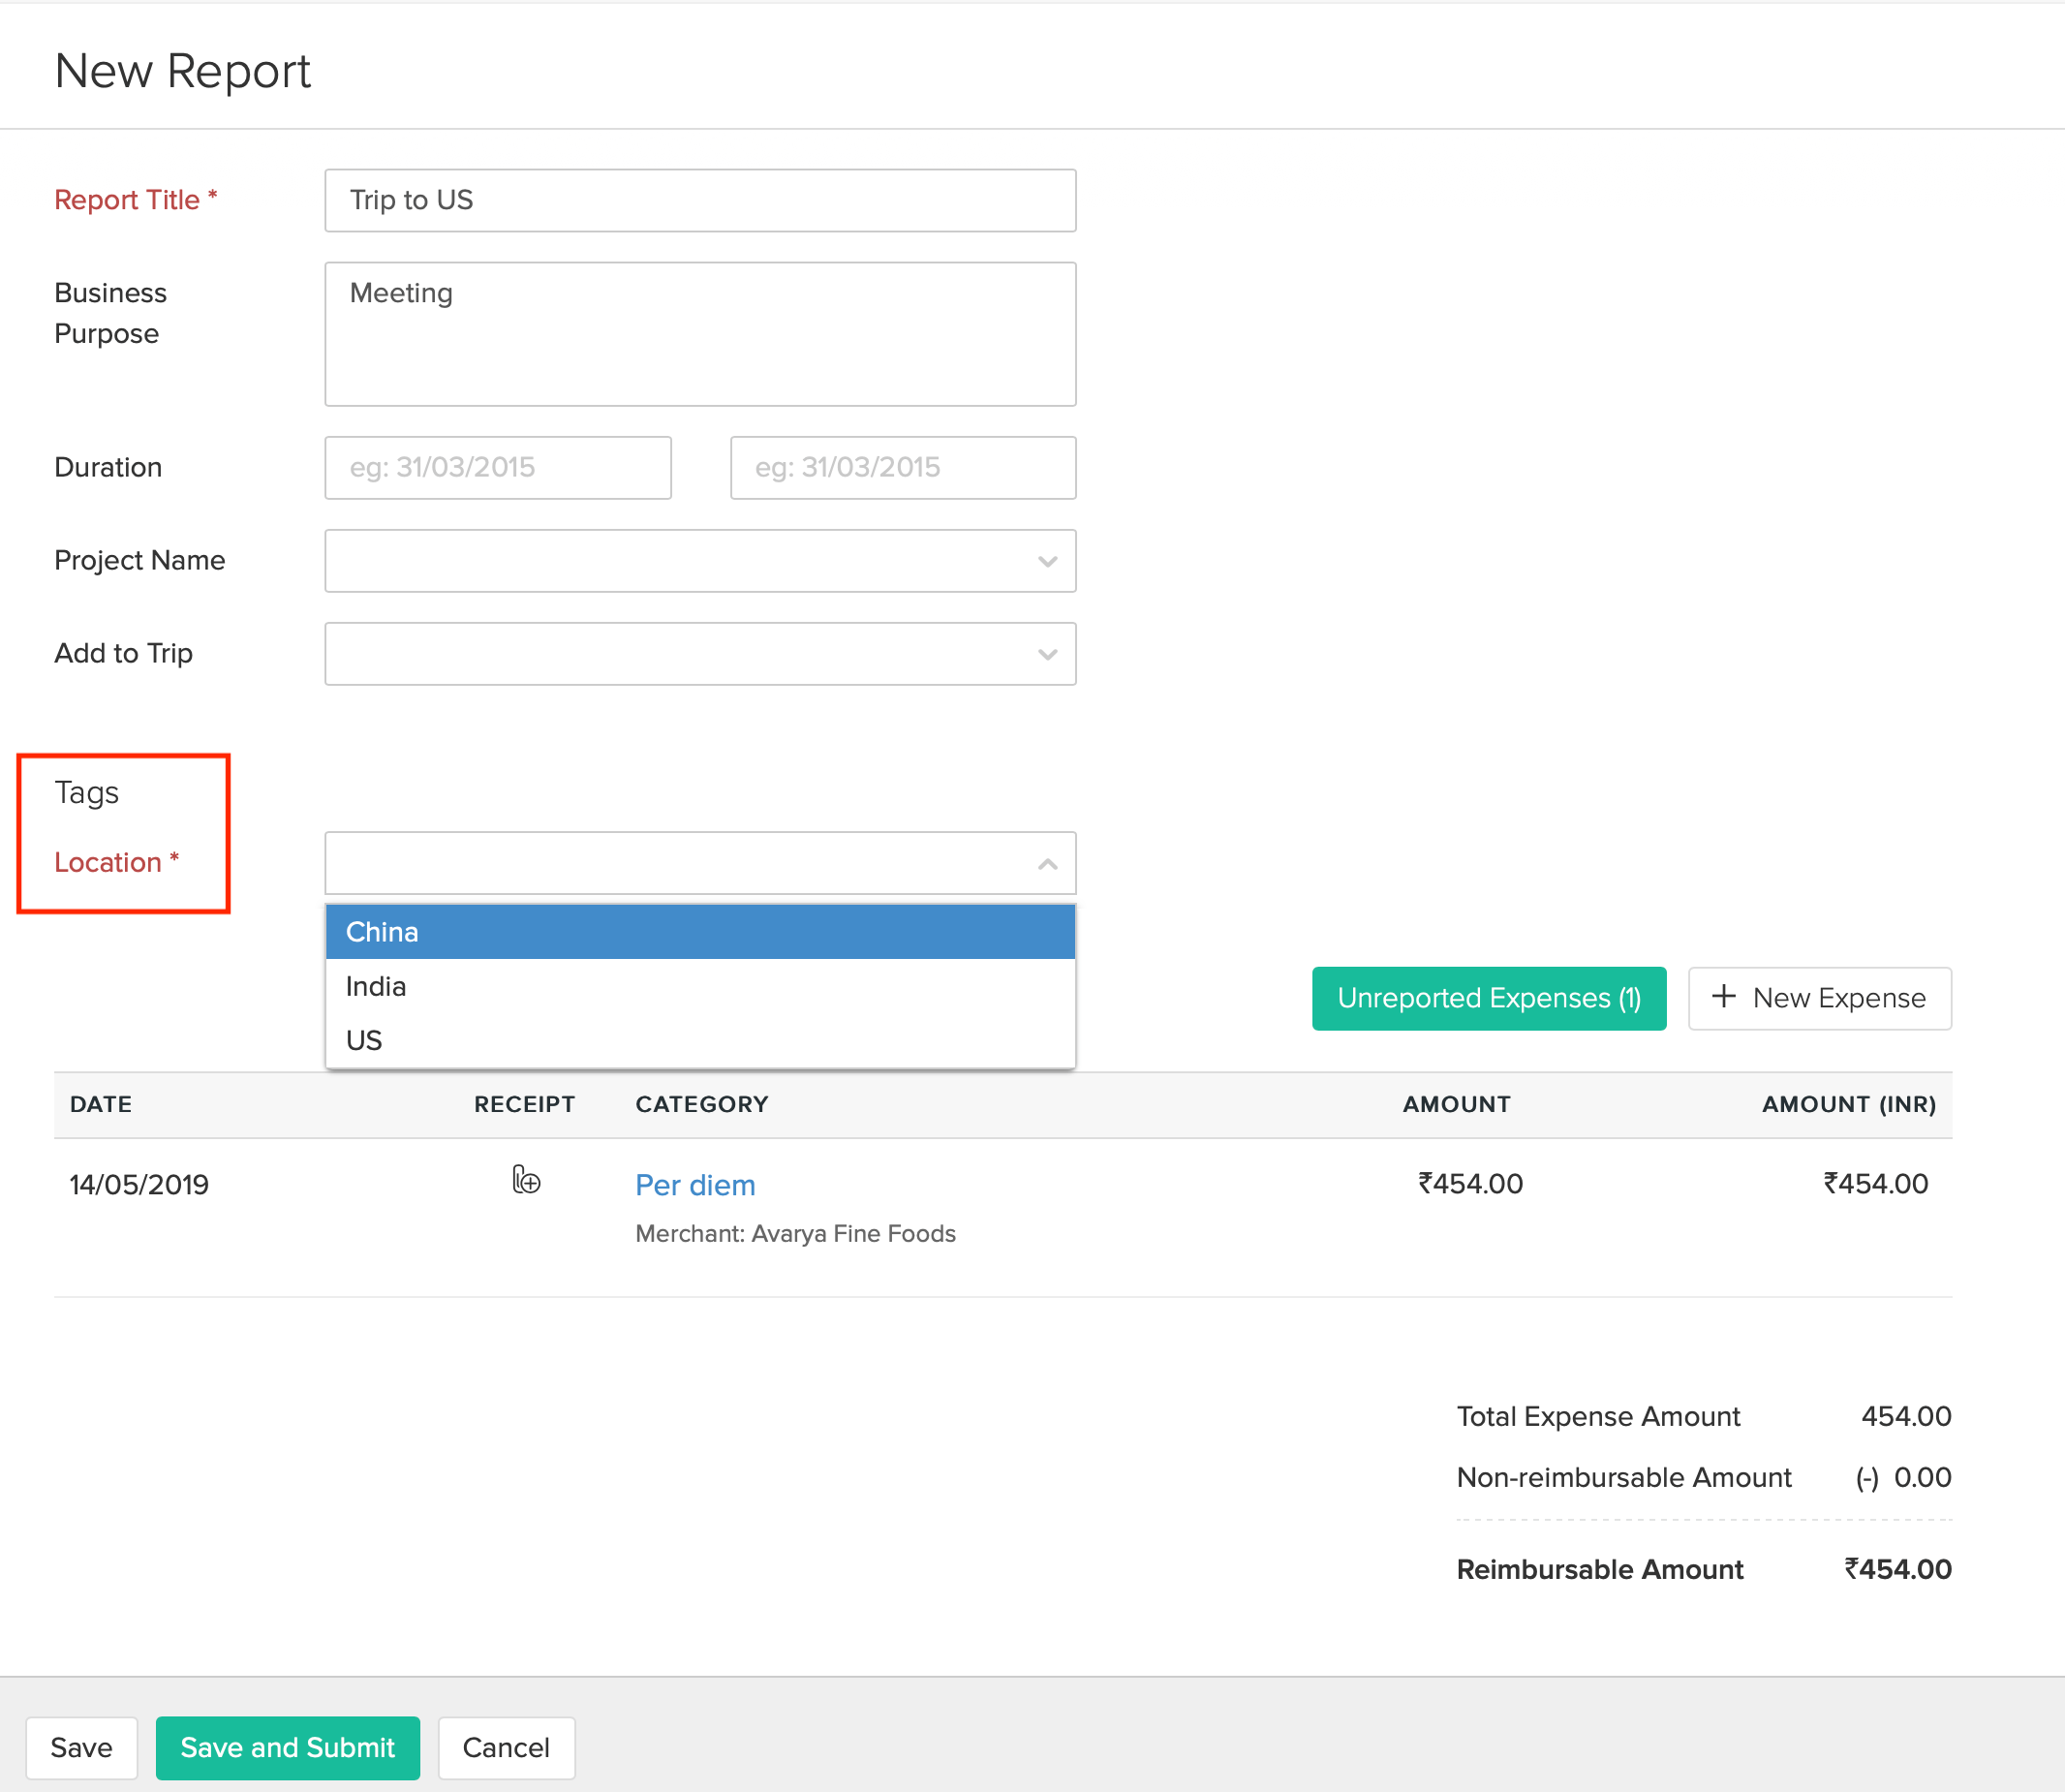 Enabling Tags and Configuring Preferences